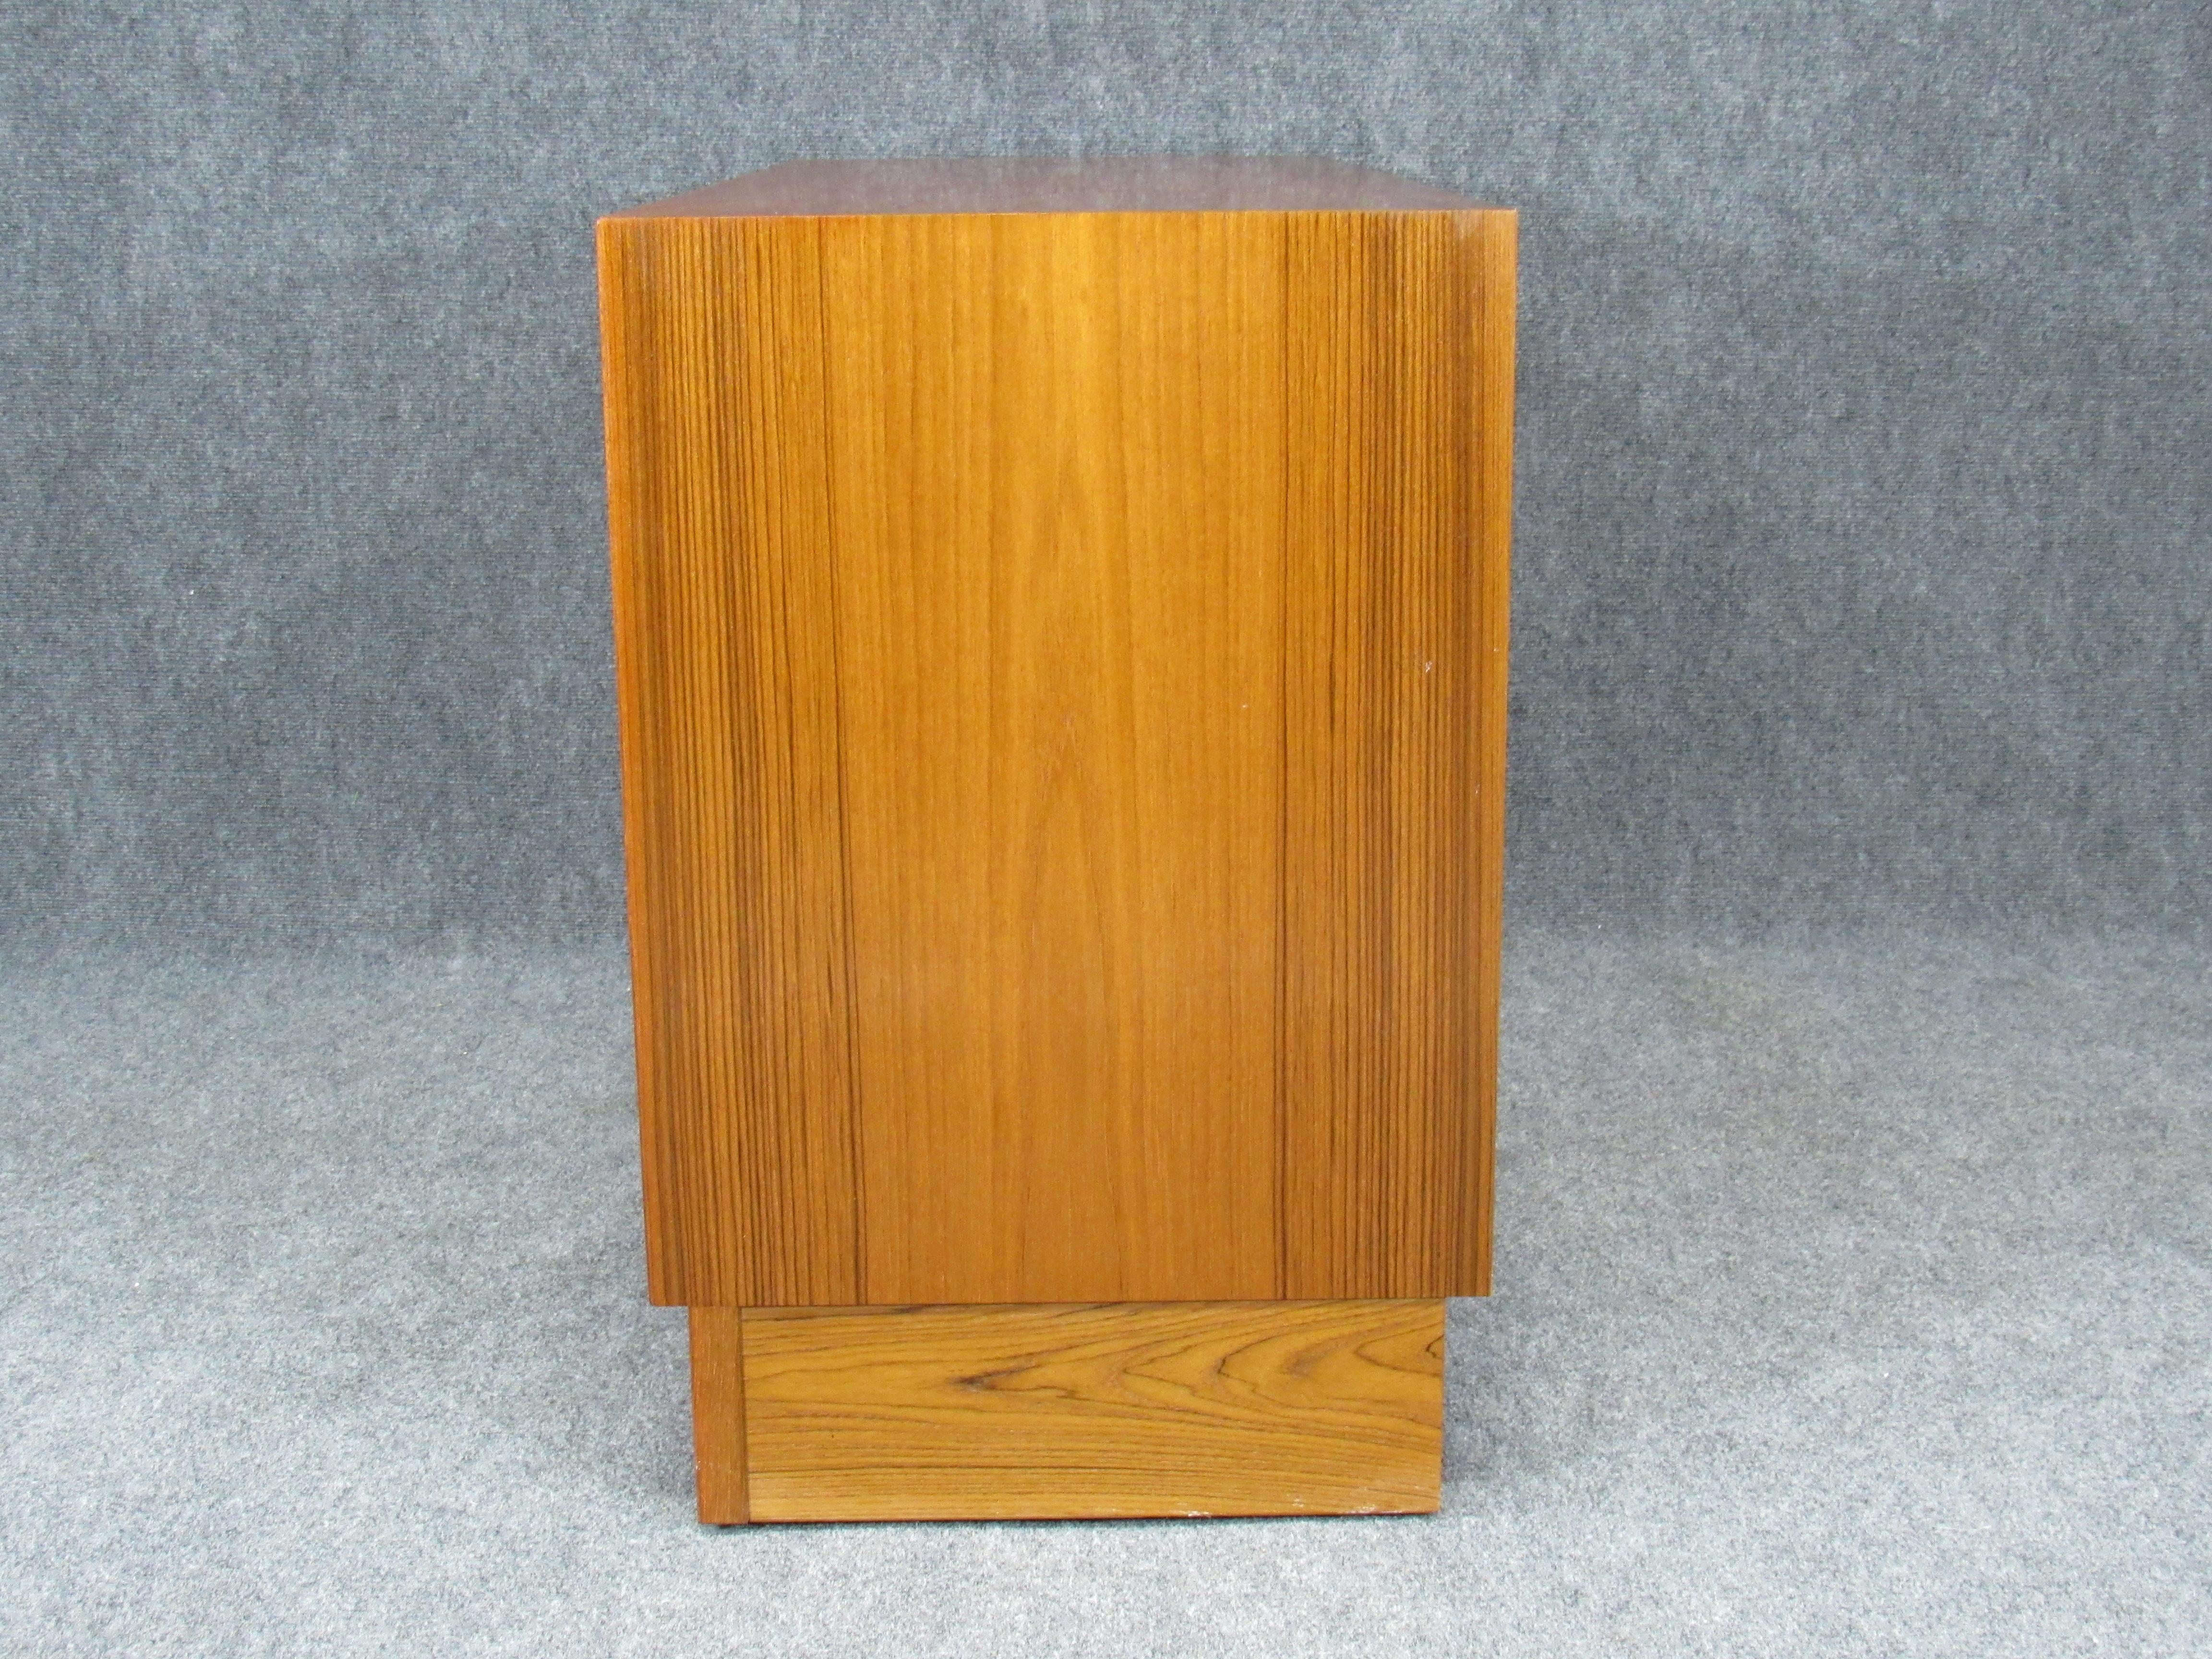 Set of two matching 1960s Mid-Century Modern credenzas with plinth base Danish modern Poul Hundevad for HU teak. Credenzas have 2 doors that glide smoothly and are fronted with sculpted pulls. Well crafted and executed pieces. Marked with HU paper